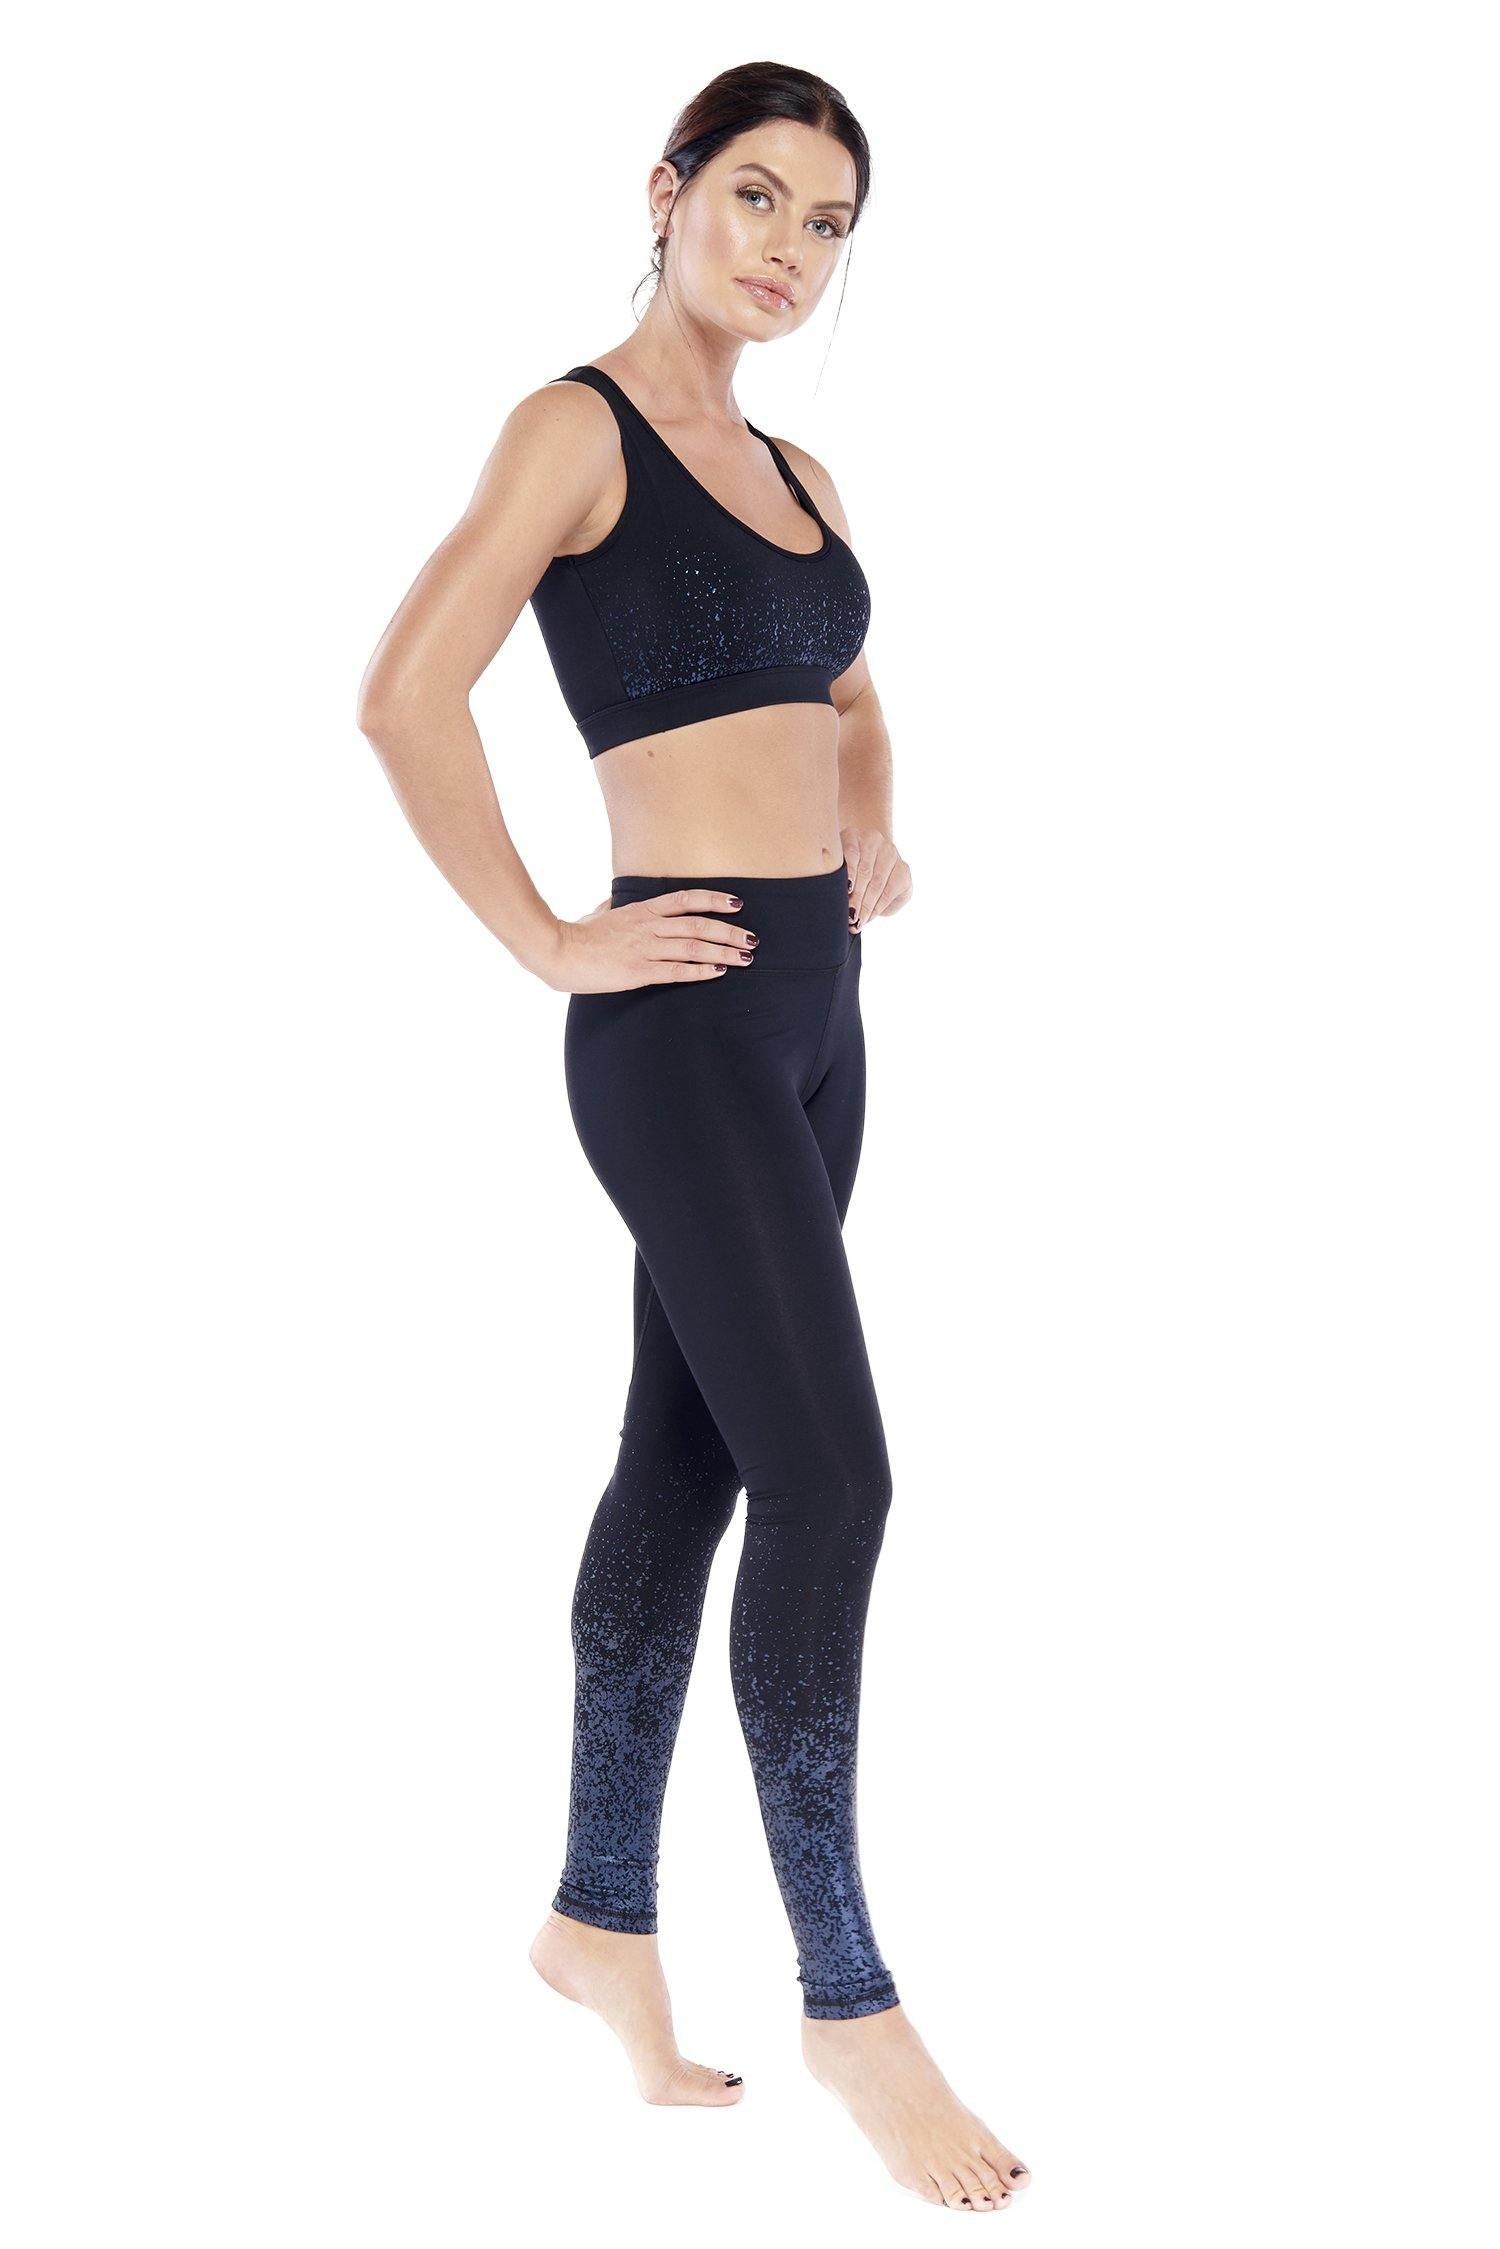 Mineral  Fitness legging - For you and all